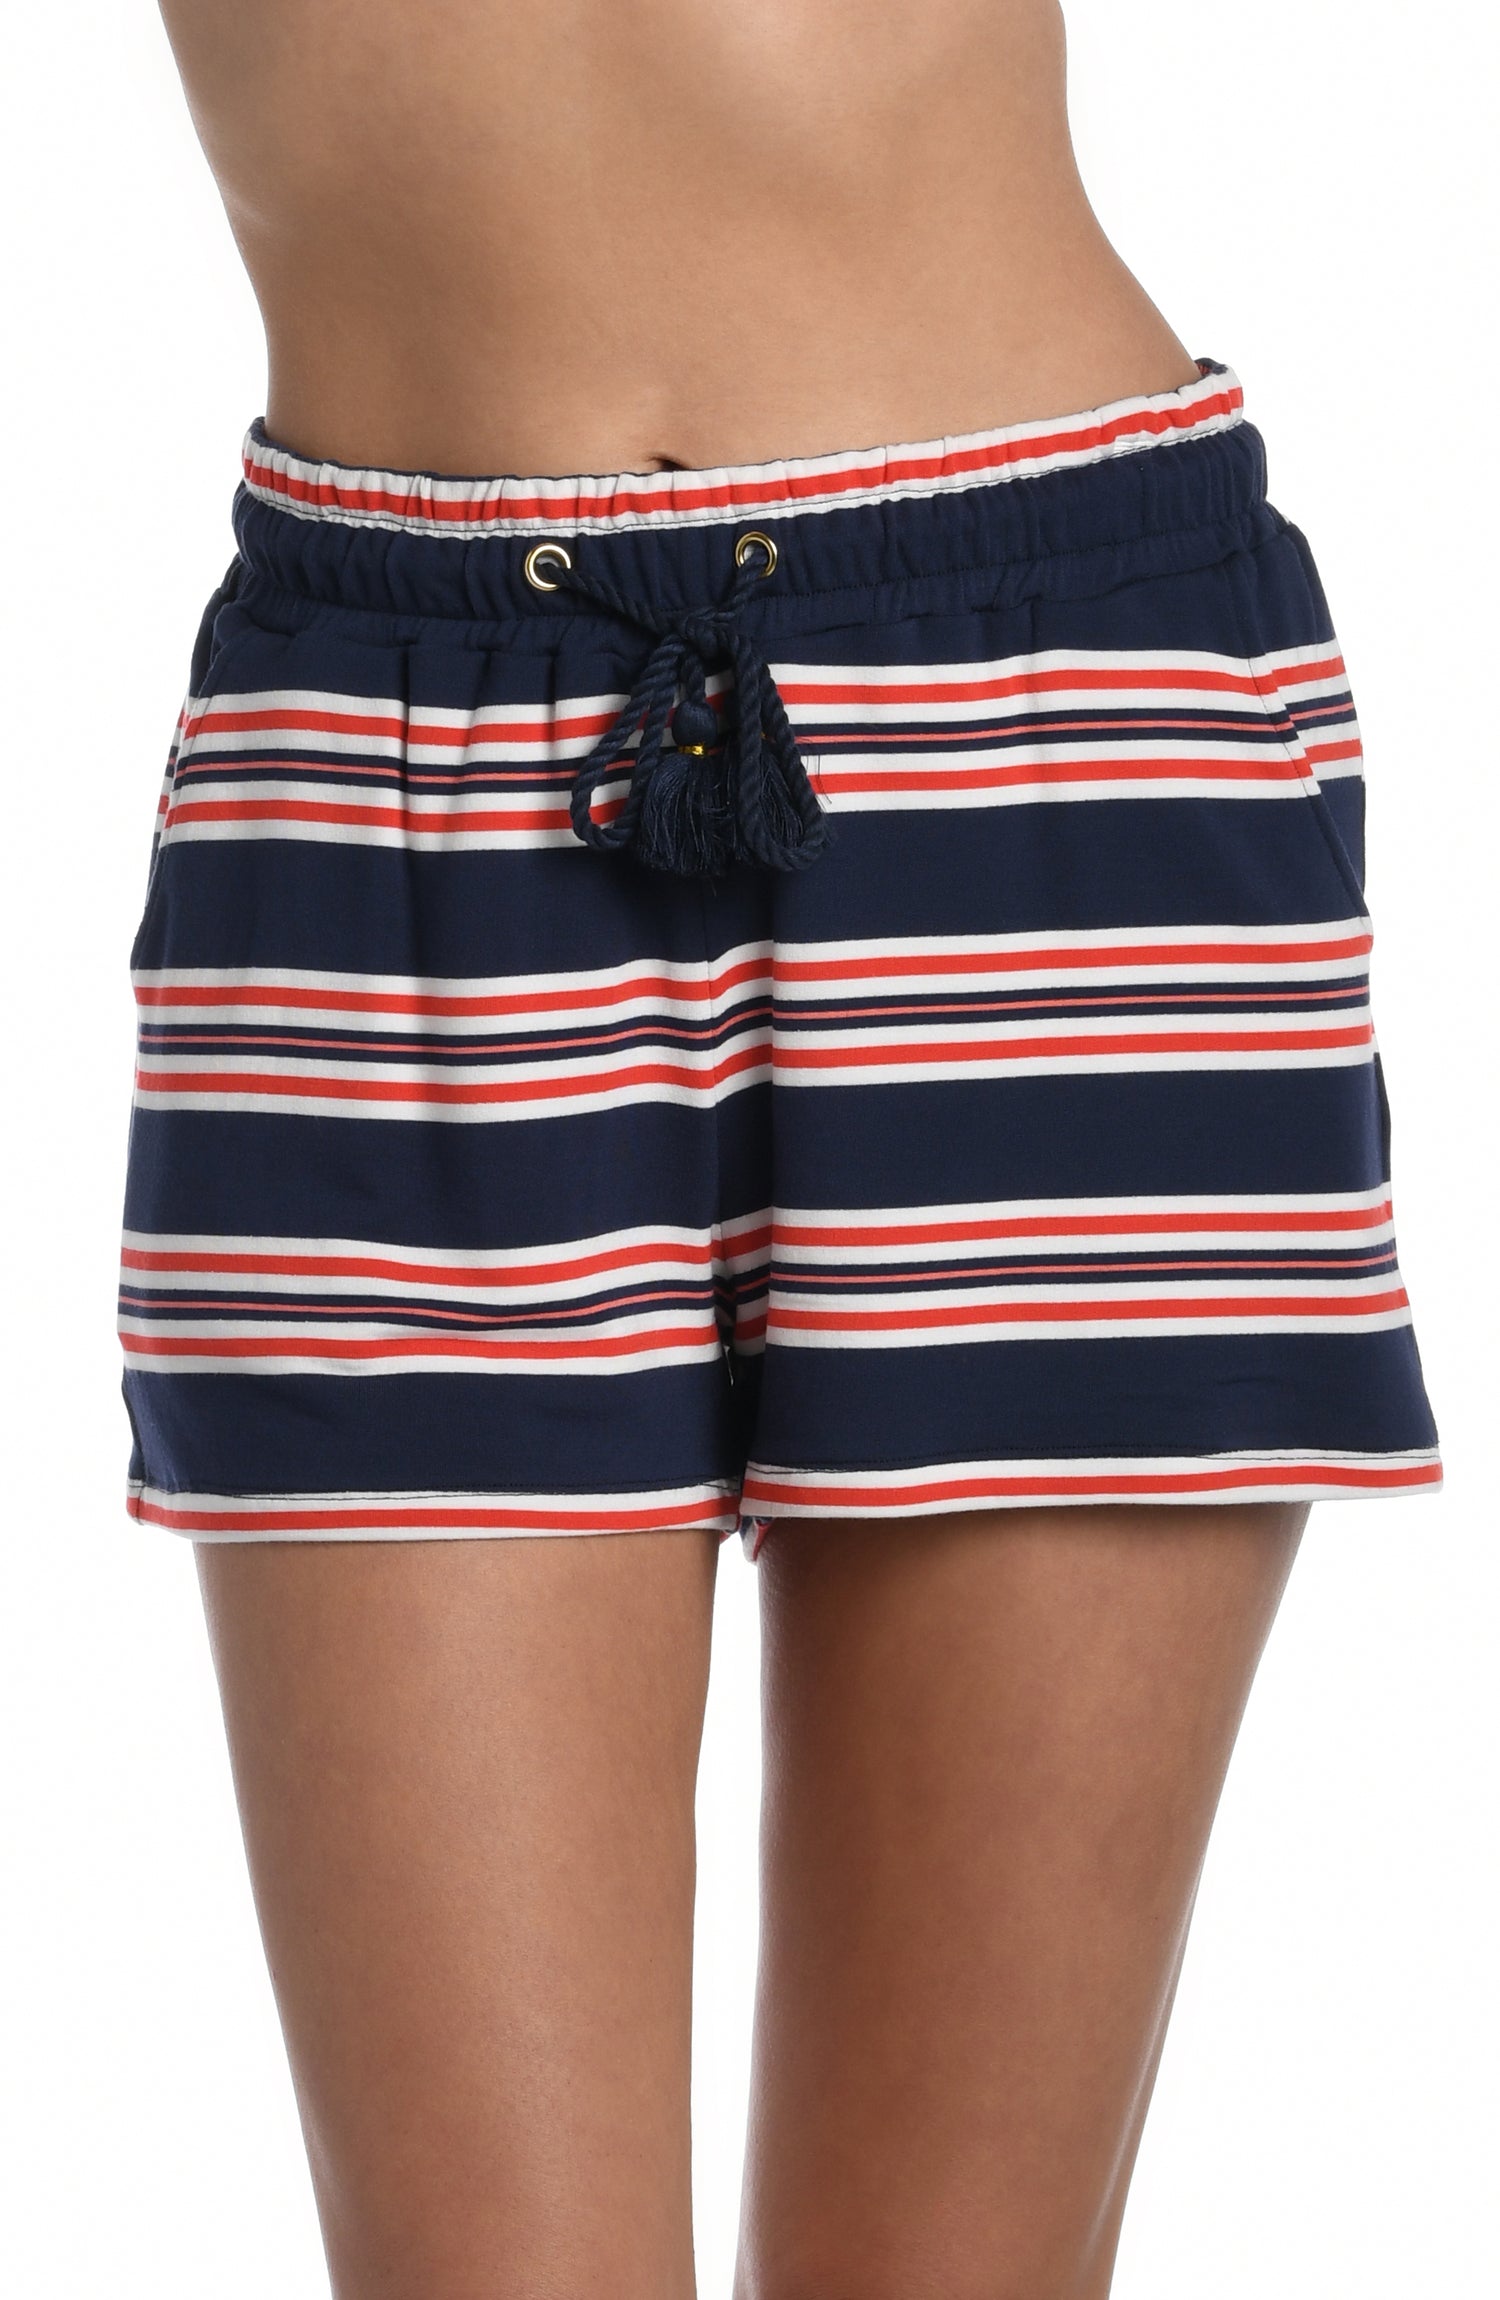 Model is wearing a red, white, and blue striped patterned beach shorts from our Sailor Stripe collection!